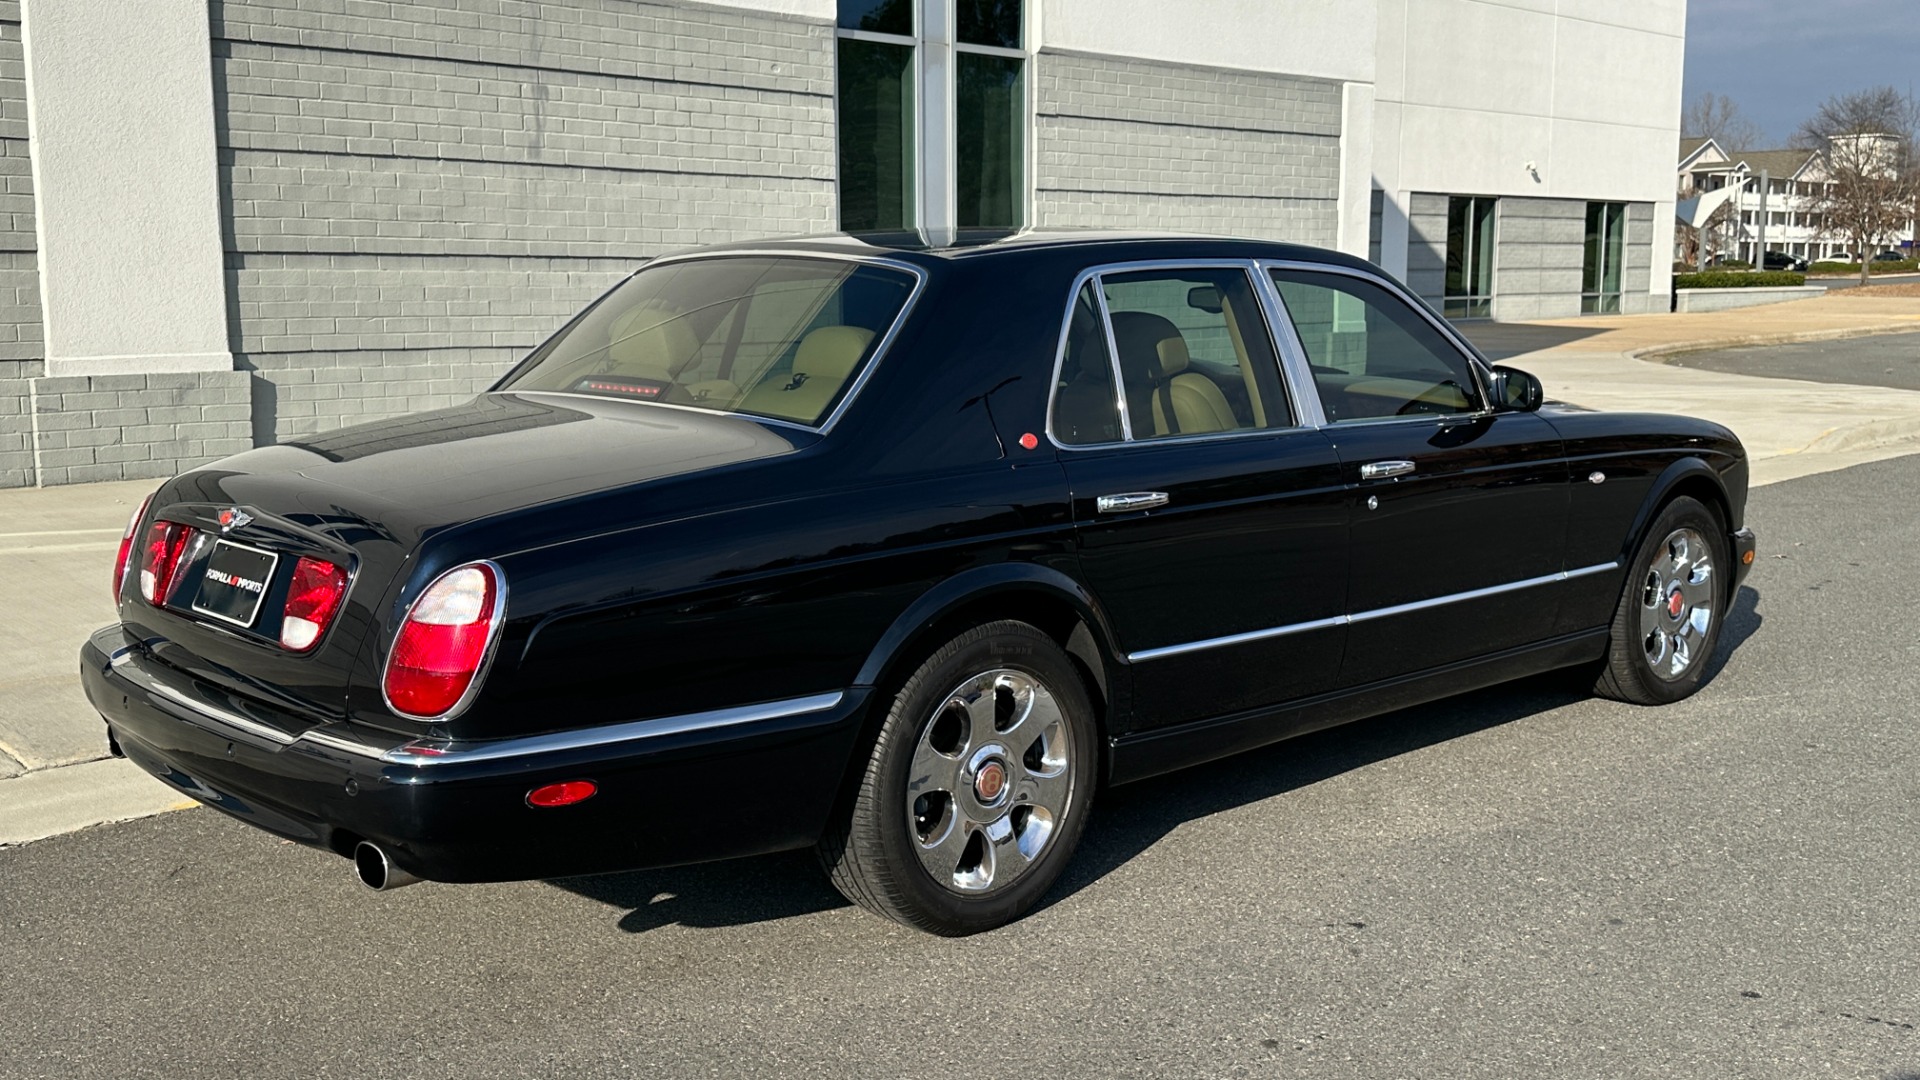 Used 2001 Bentley ARNAGE RED LABEL 6.75L V8 / TURBO / FULL LEATHER / WOOD TRIM / HEATED SEATS / SUNR for sale $26,999 at Formula Imports in Charlotte NC 28227 7